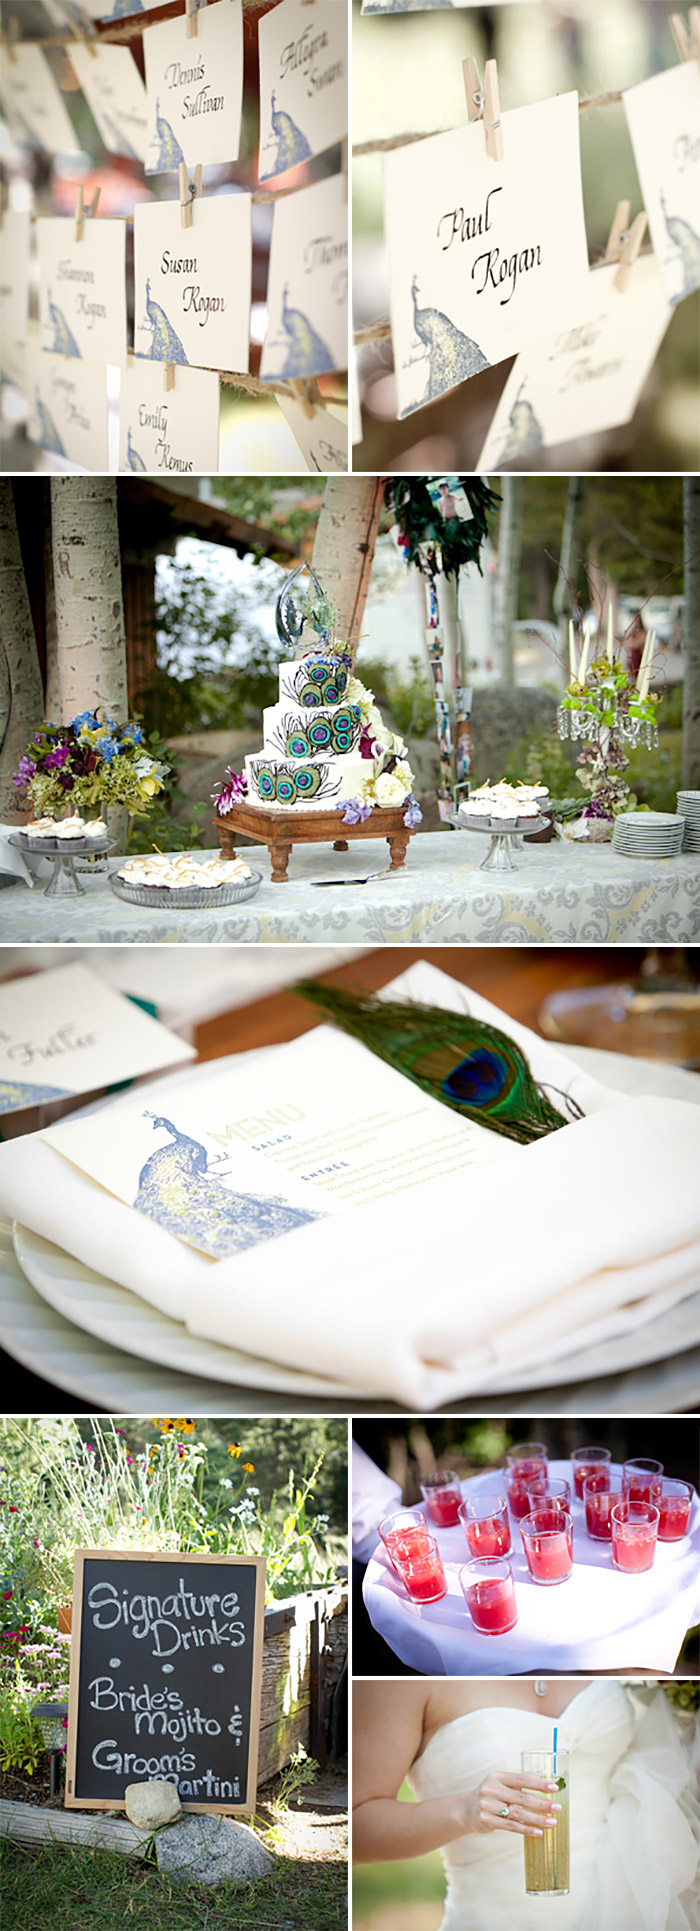 A Vintage Garden Party Wedding with letterpress peacock stationery